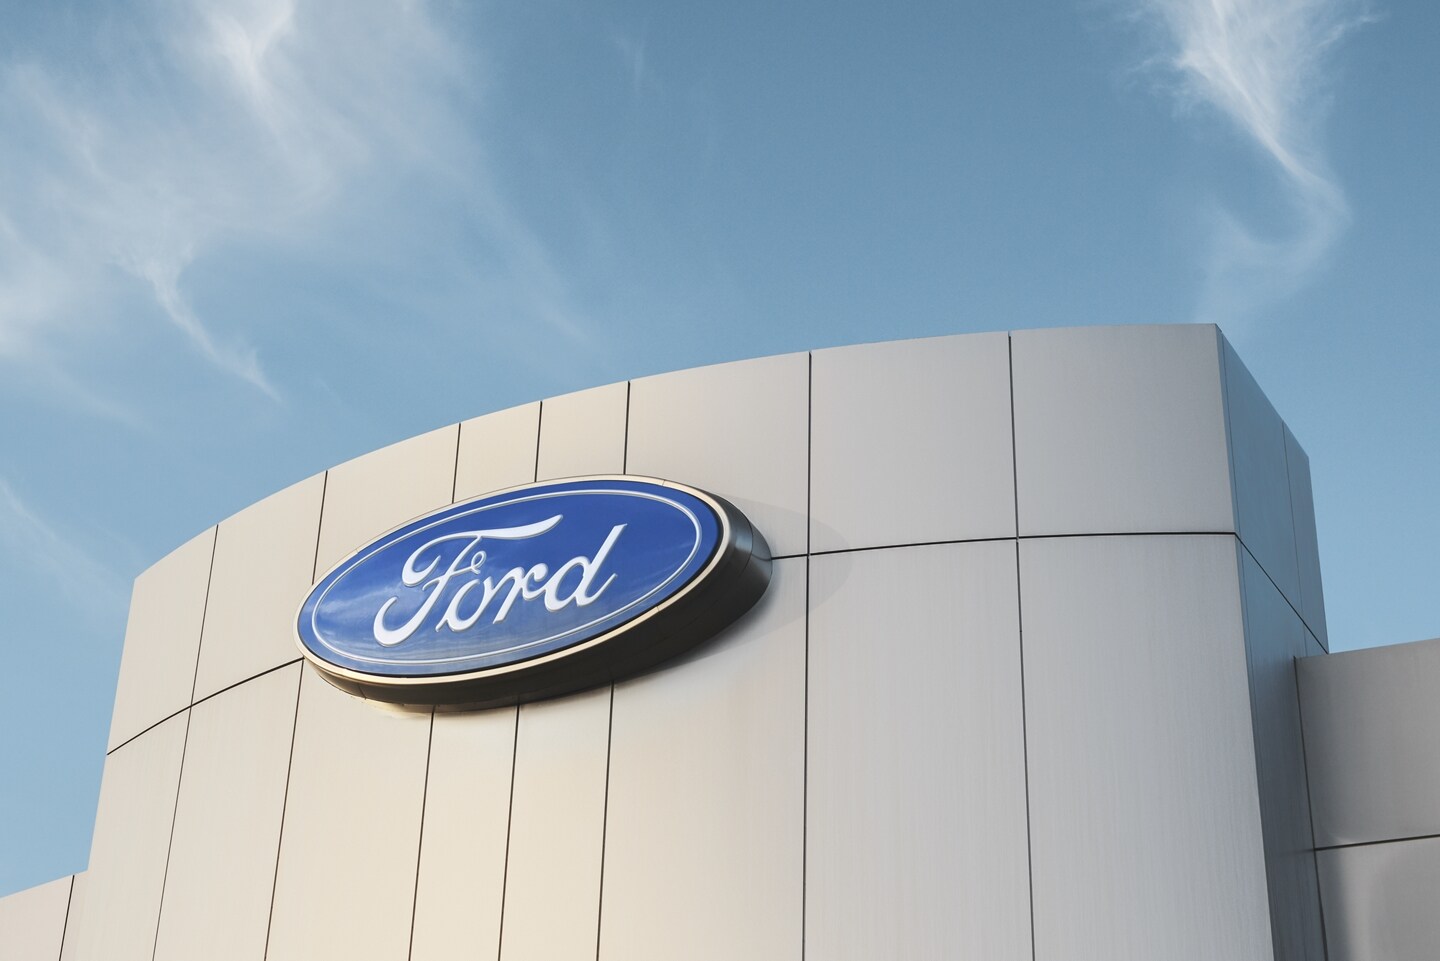 Exterior view of a Ford Dealership